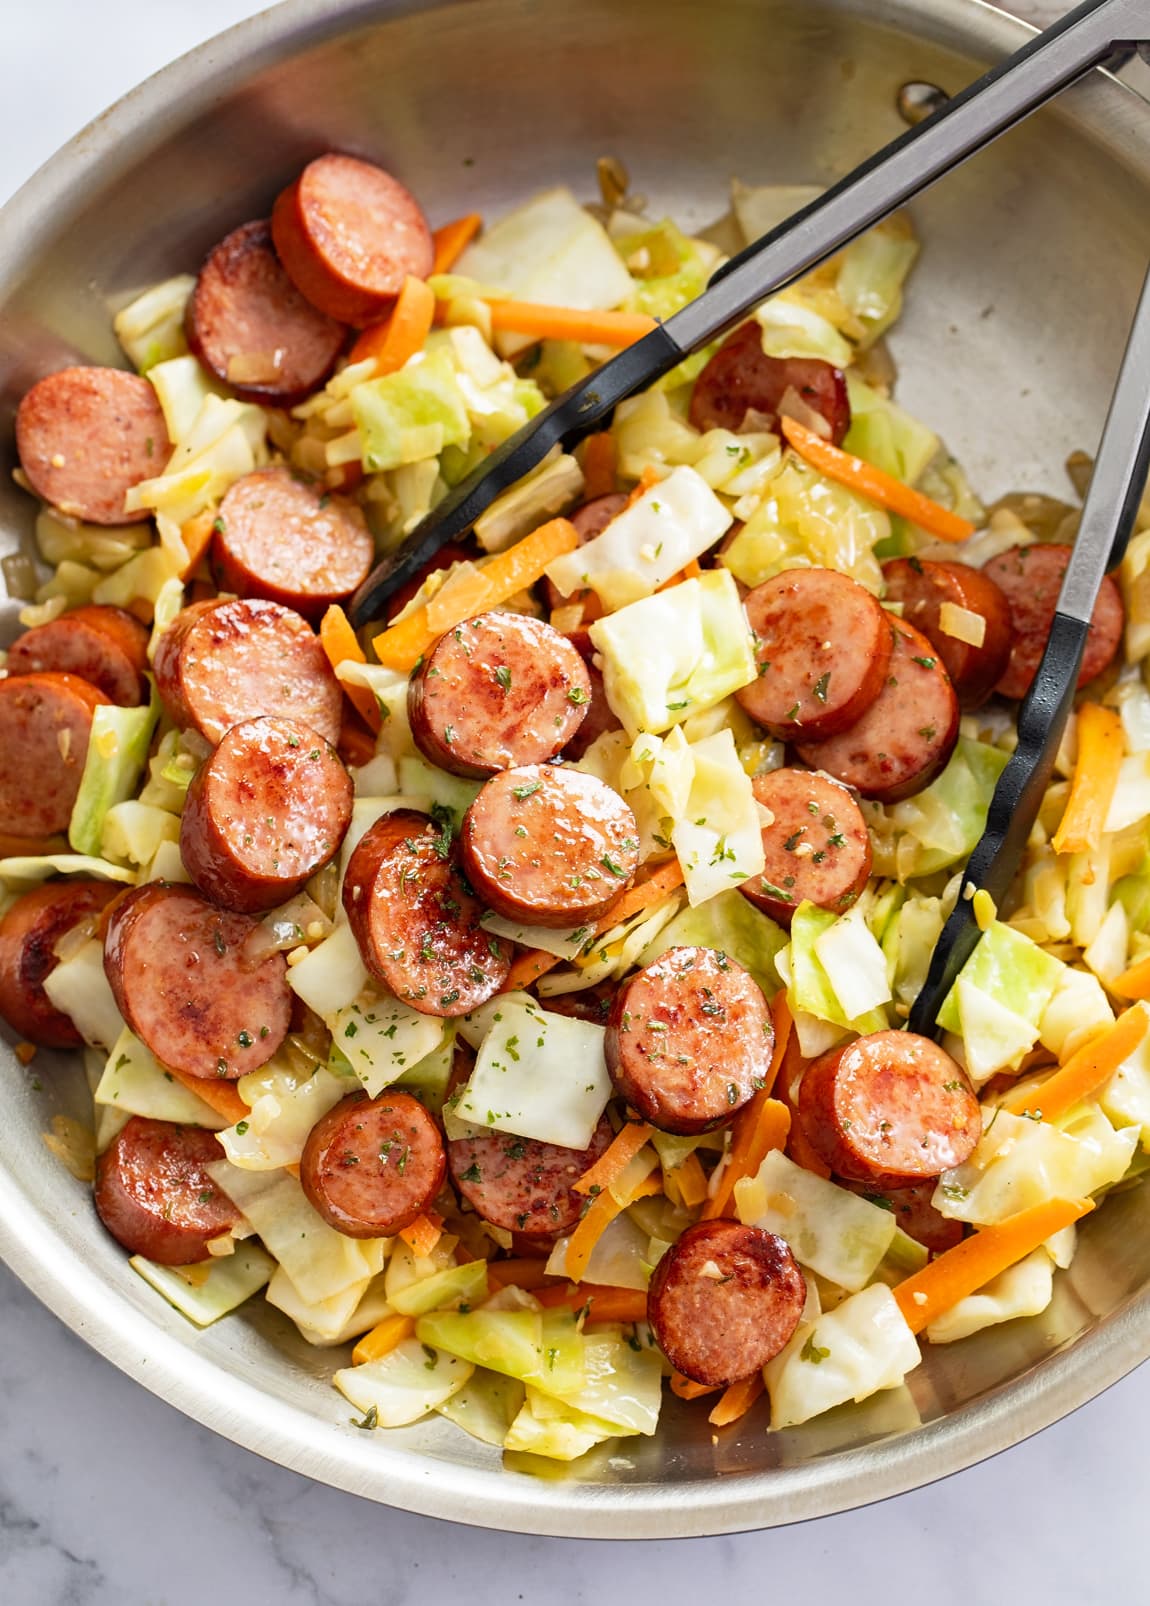 Cabbage and Sausage in a skillet with carrots and kitchen tongs.